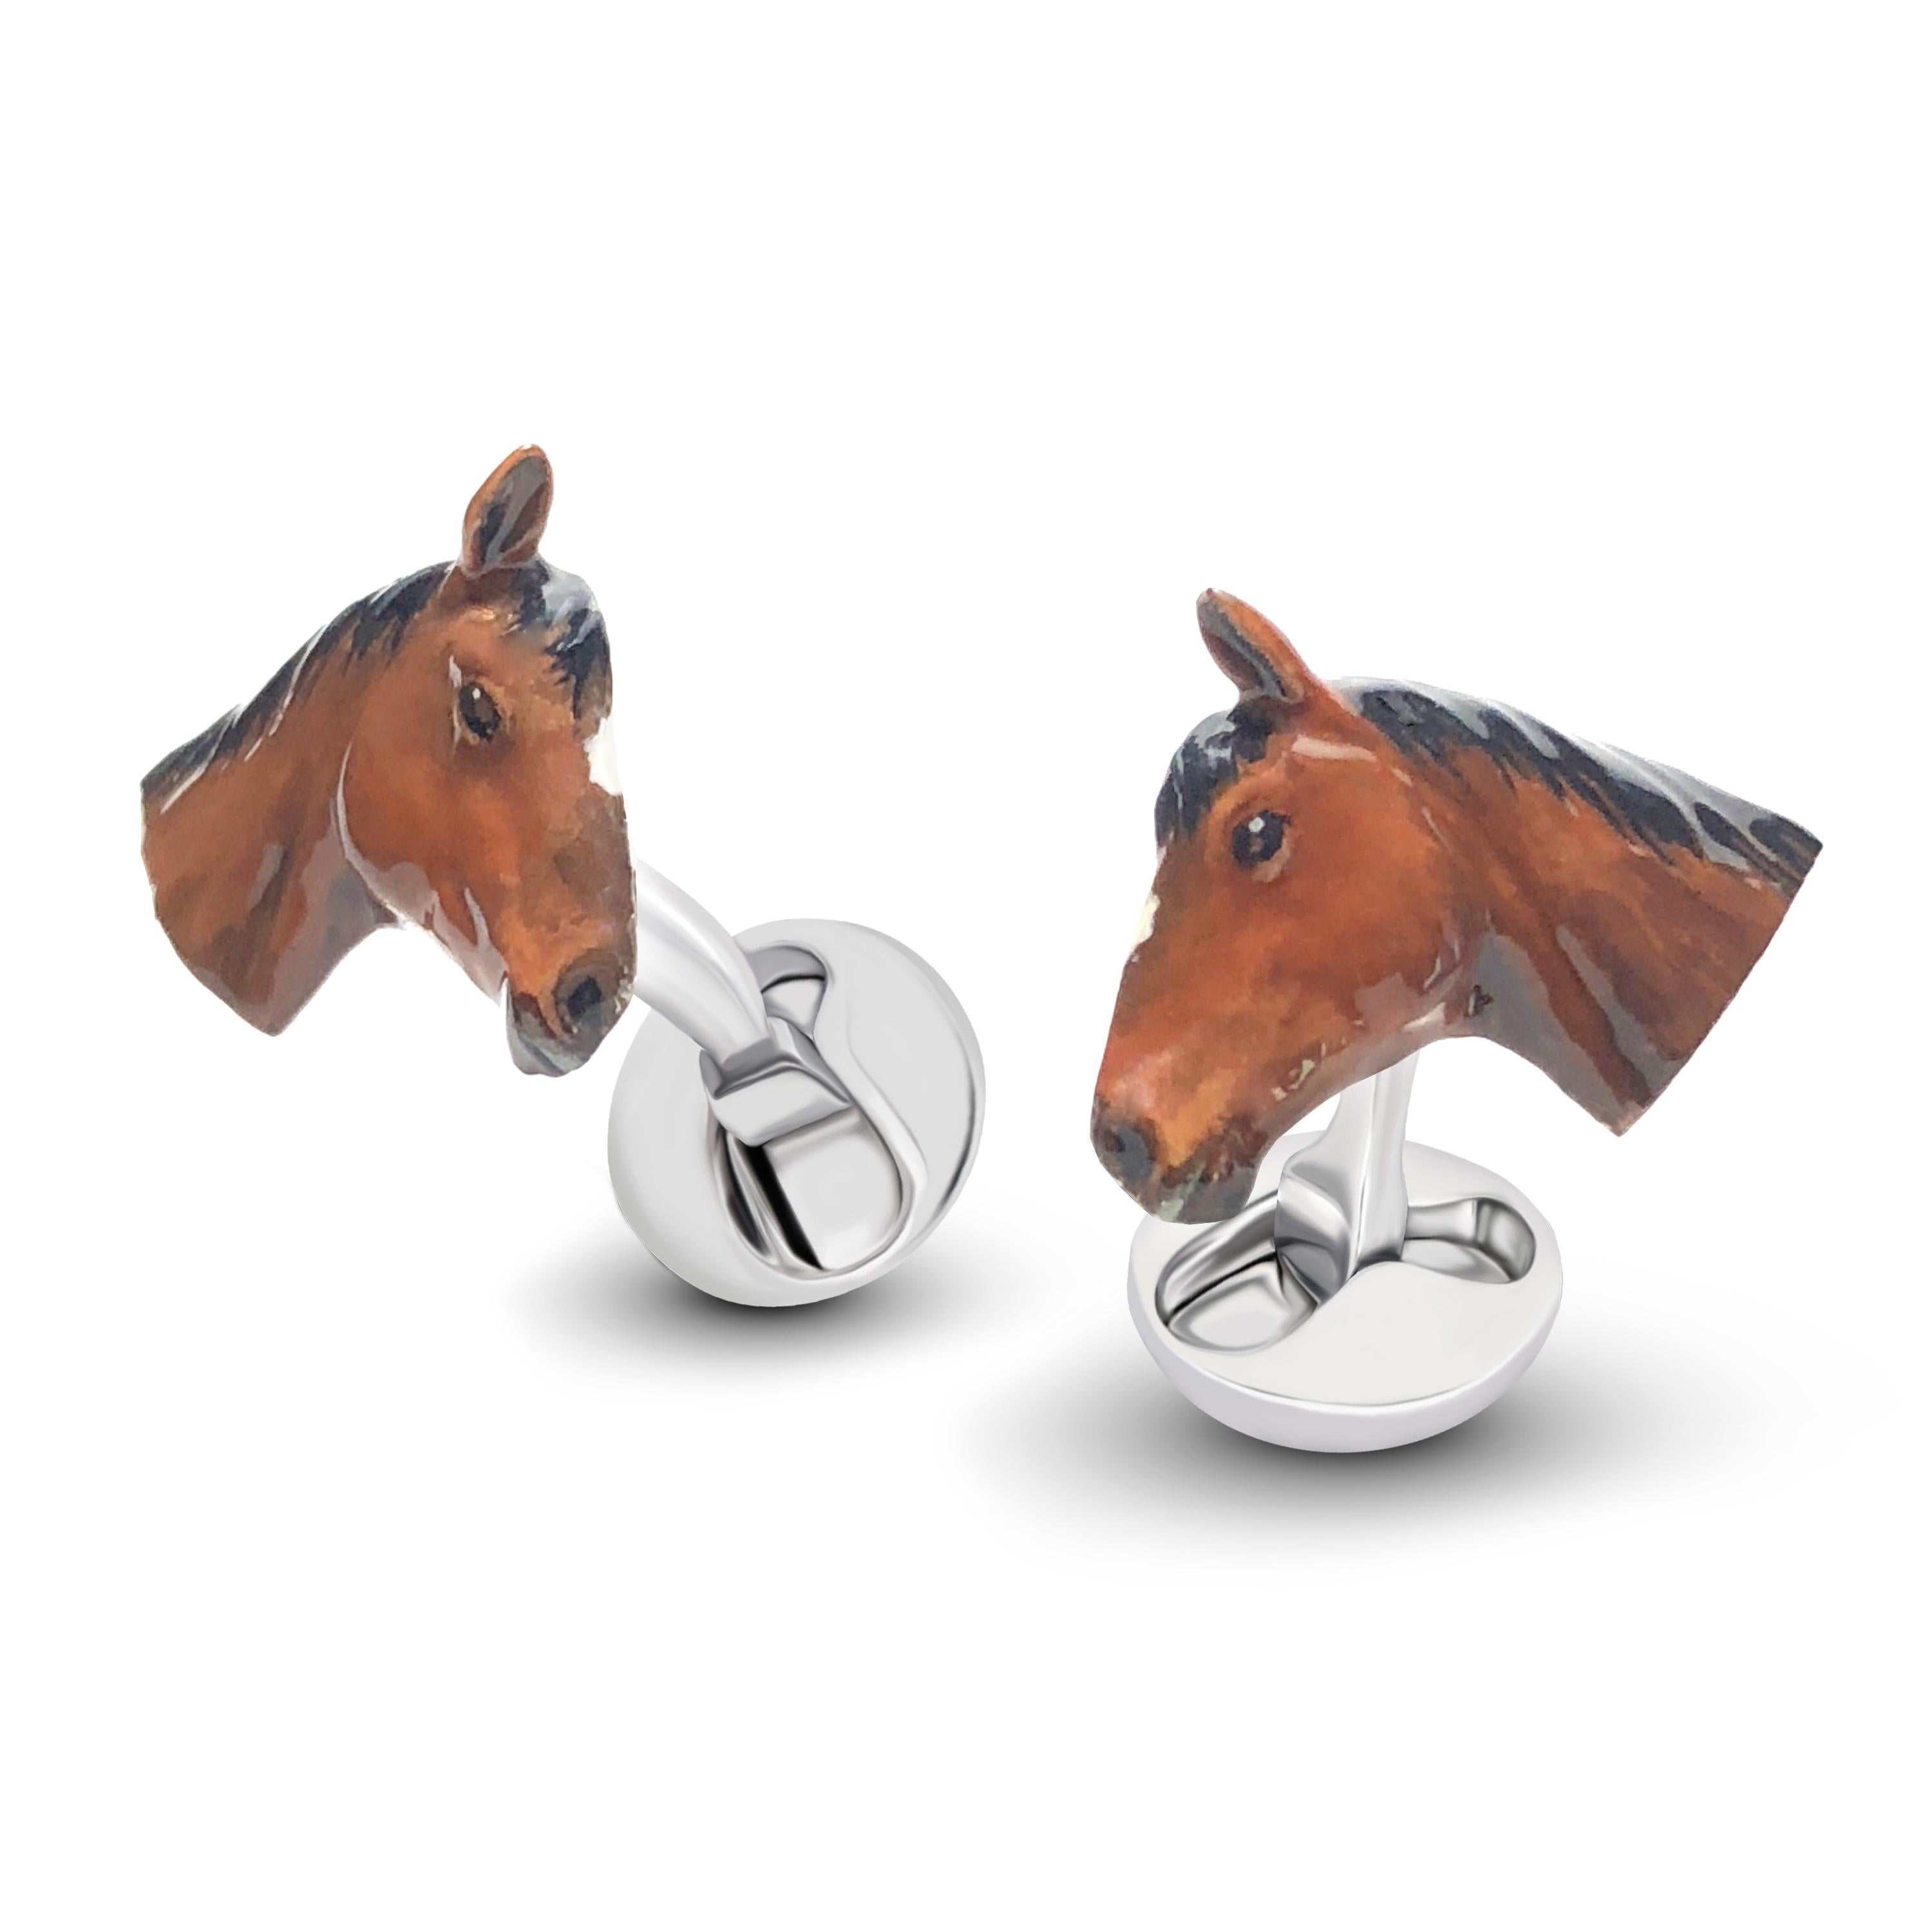 A pair of show-quality horses to adorn your cuffs on a special evening, these hand-painted pieces boast mesmerizing attention to detail achieved after hours of meticulous artisanship workmanship. Cheer on your favorite racehorse with custom